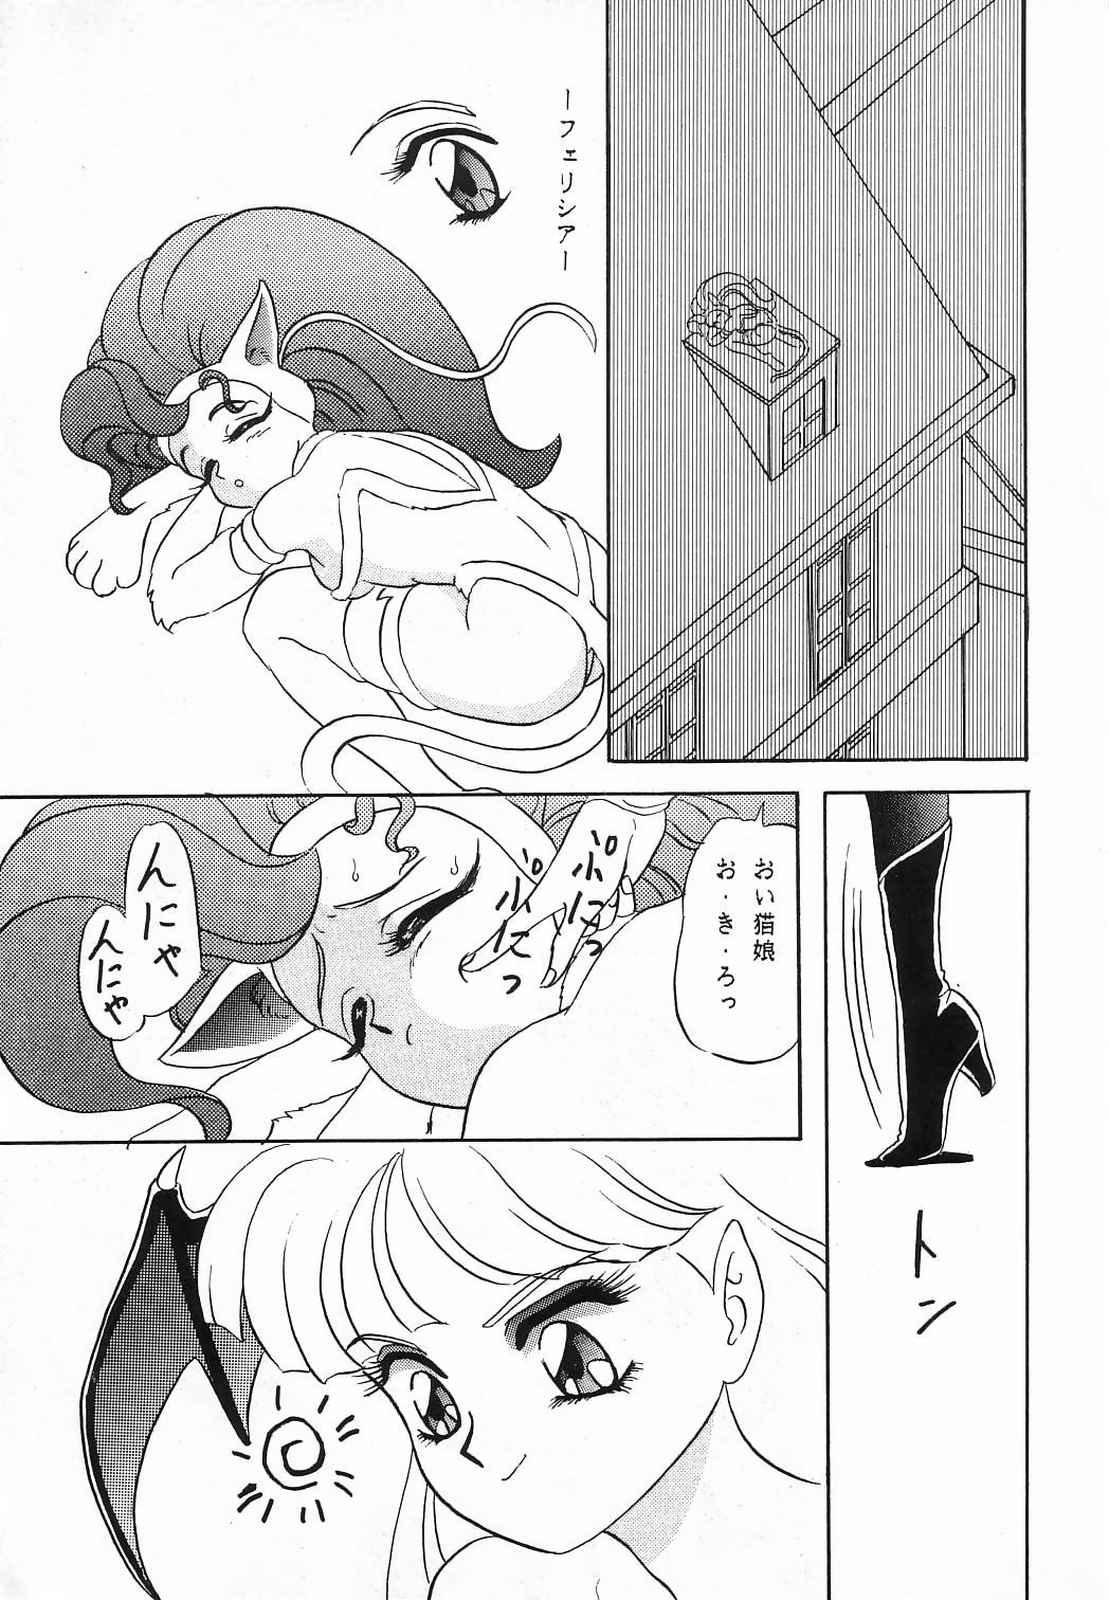 Gay Averagedick Lunch Box 10 - Lunch Time 2 - Sailor moon Darkstalkers Adult - Page 7